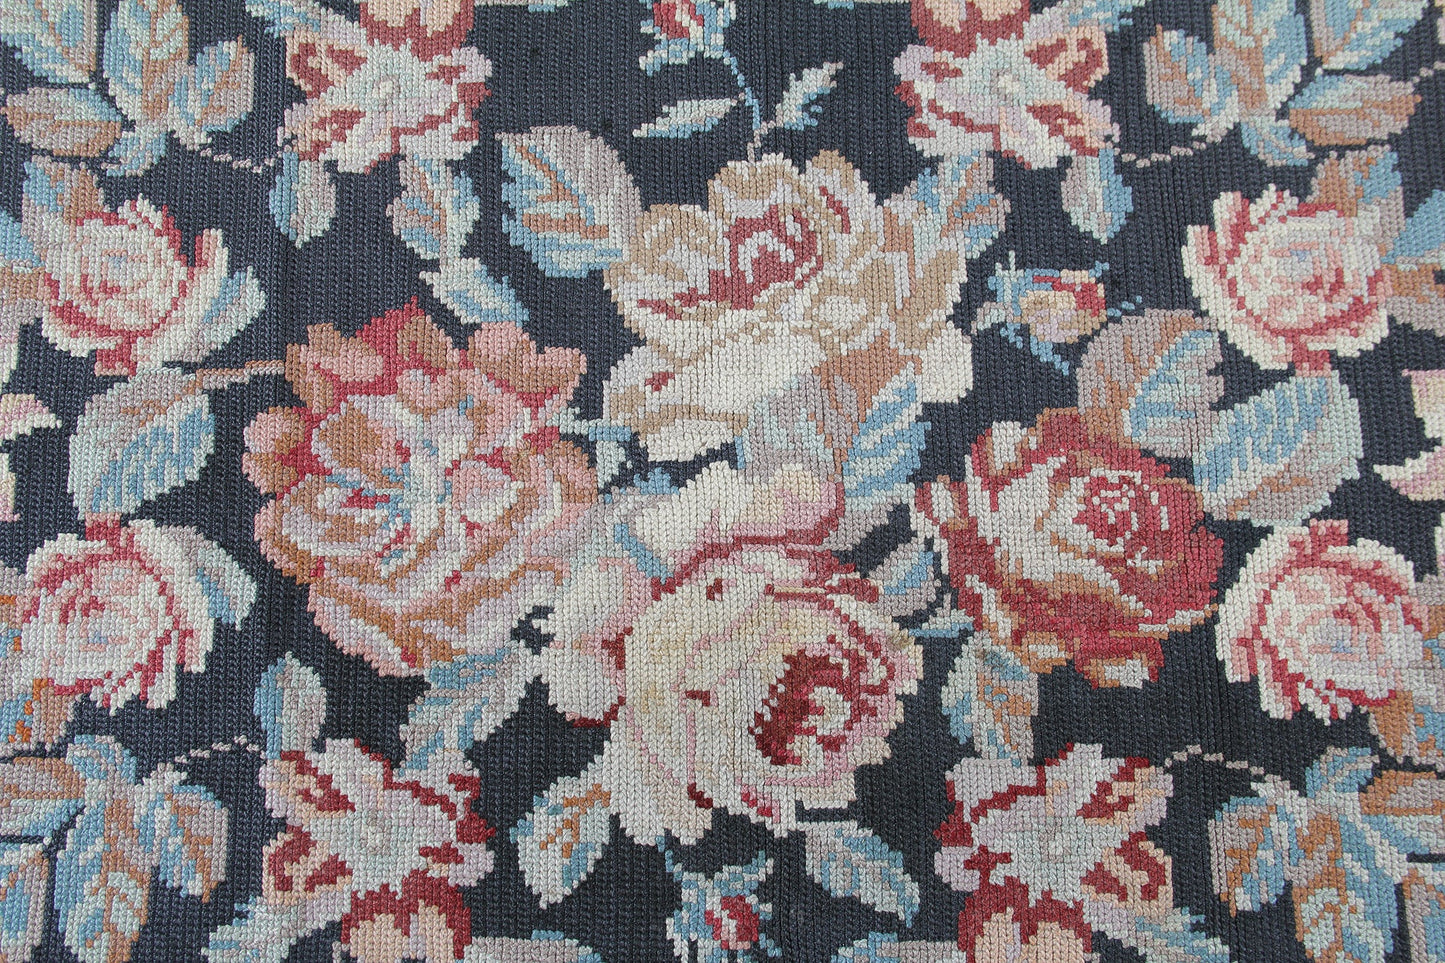 Portuguese Needlepoint  With a Floral Design product image #27556275126442